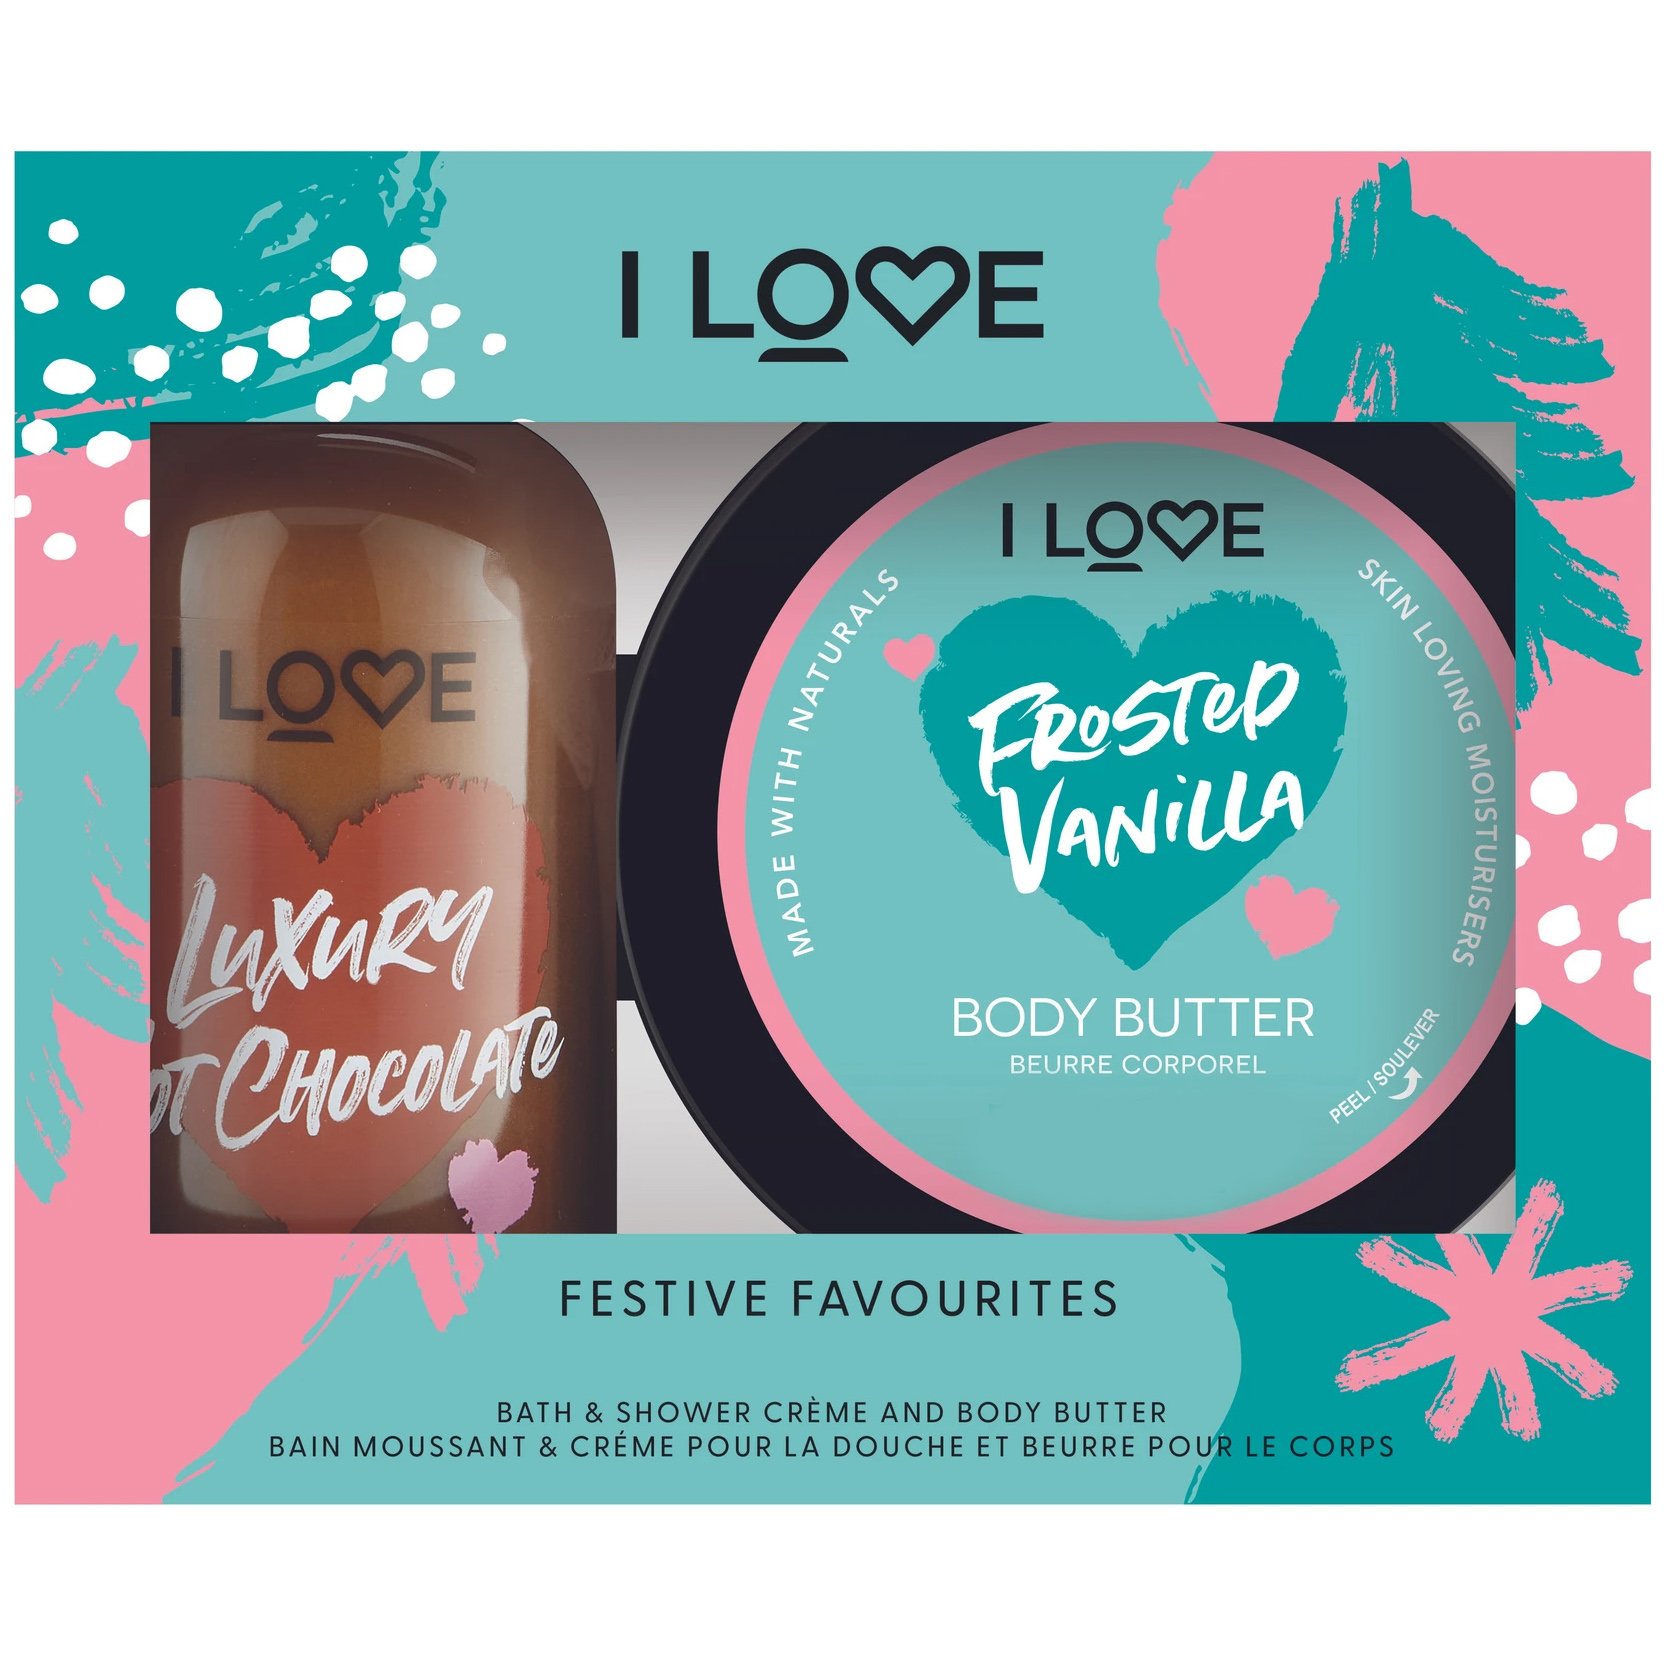 I love… Delicious Duo Gift Box Festive Favourites Luxury Hot Chocolate Shower Cream 250ml & Frosted Vanilla Body Butter 200ml